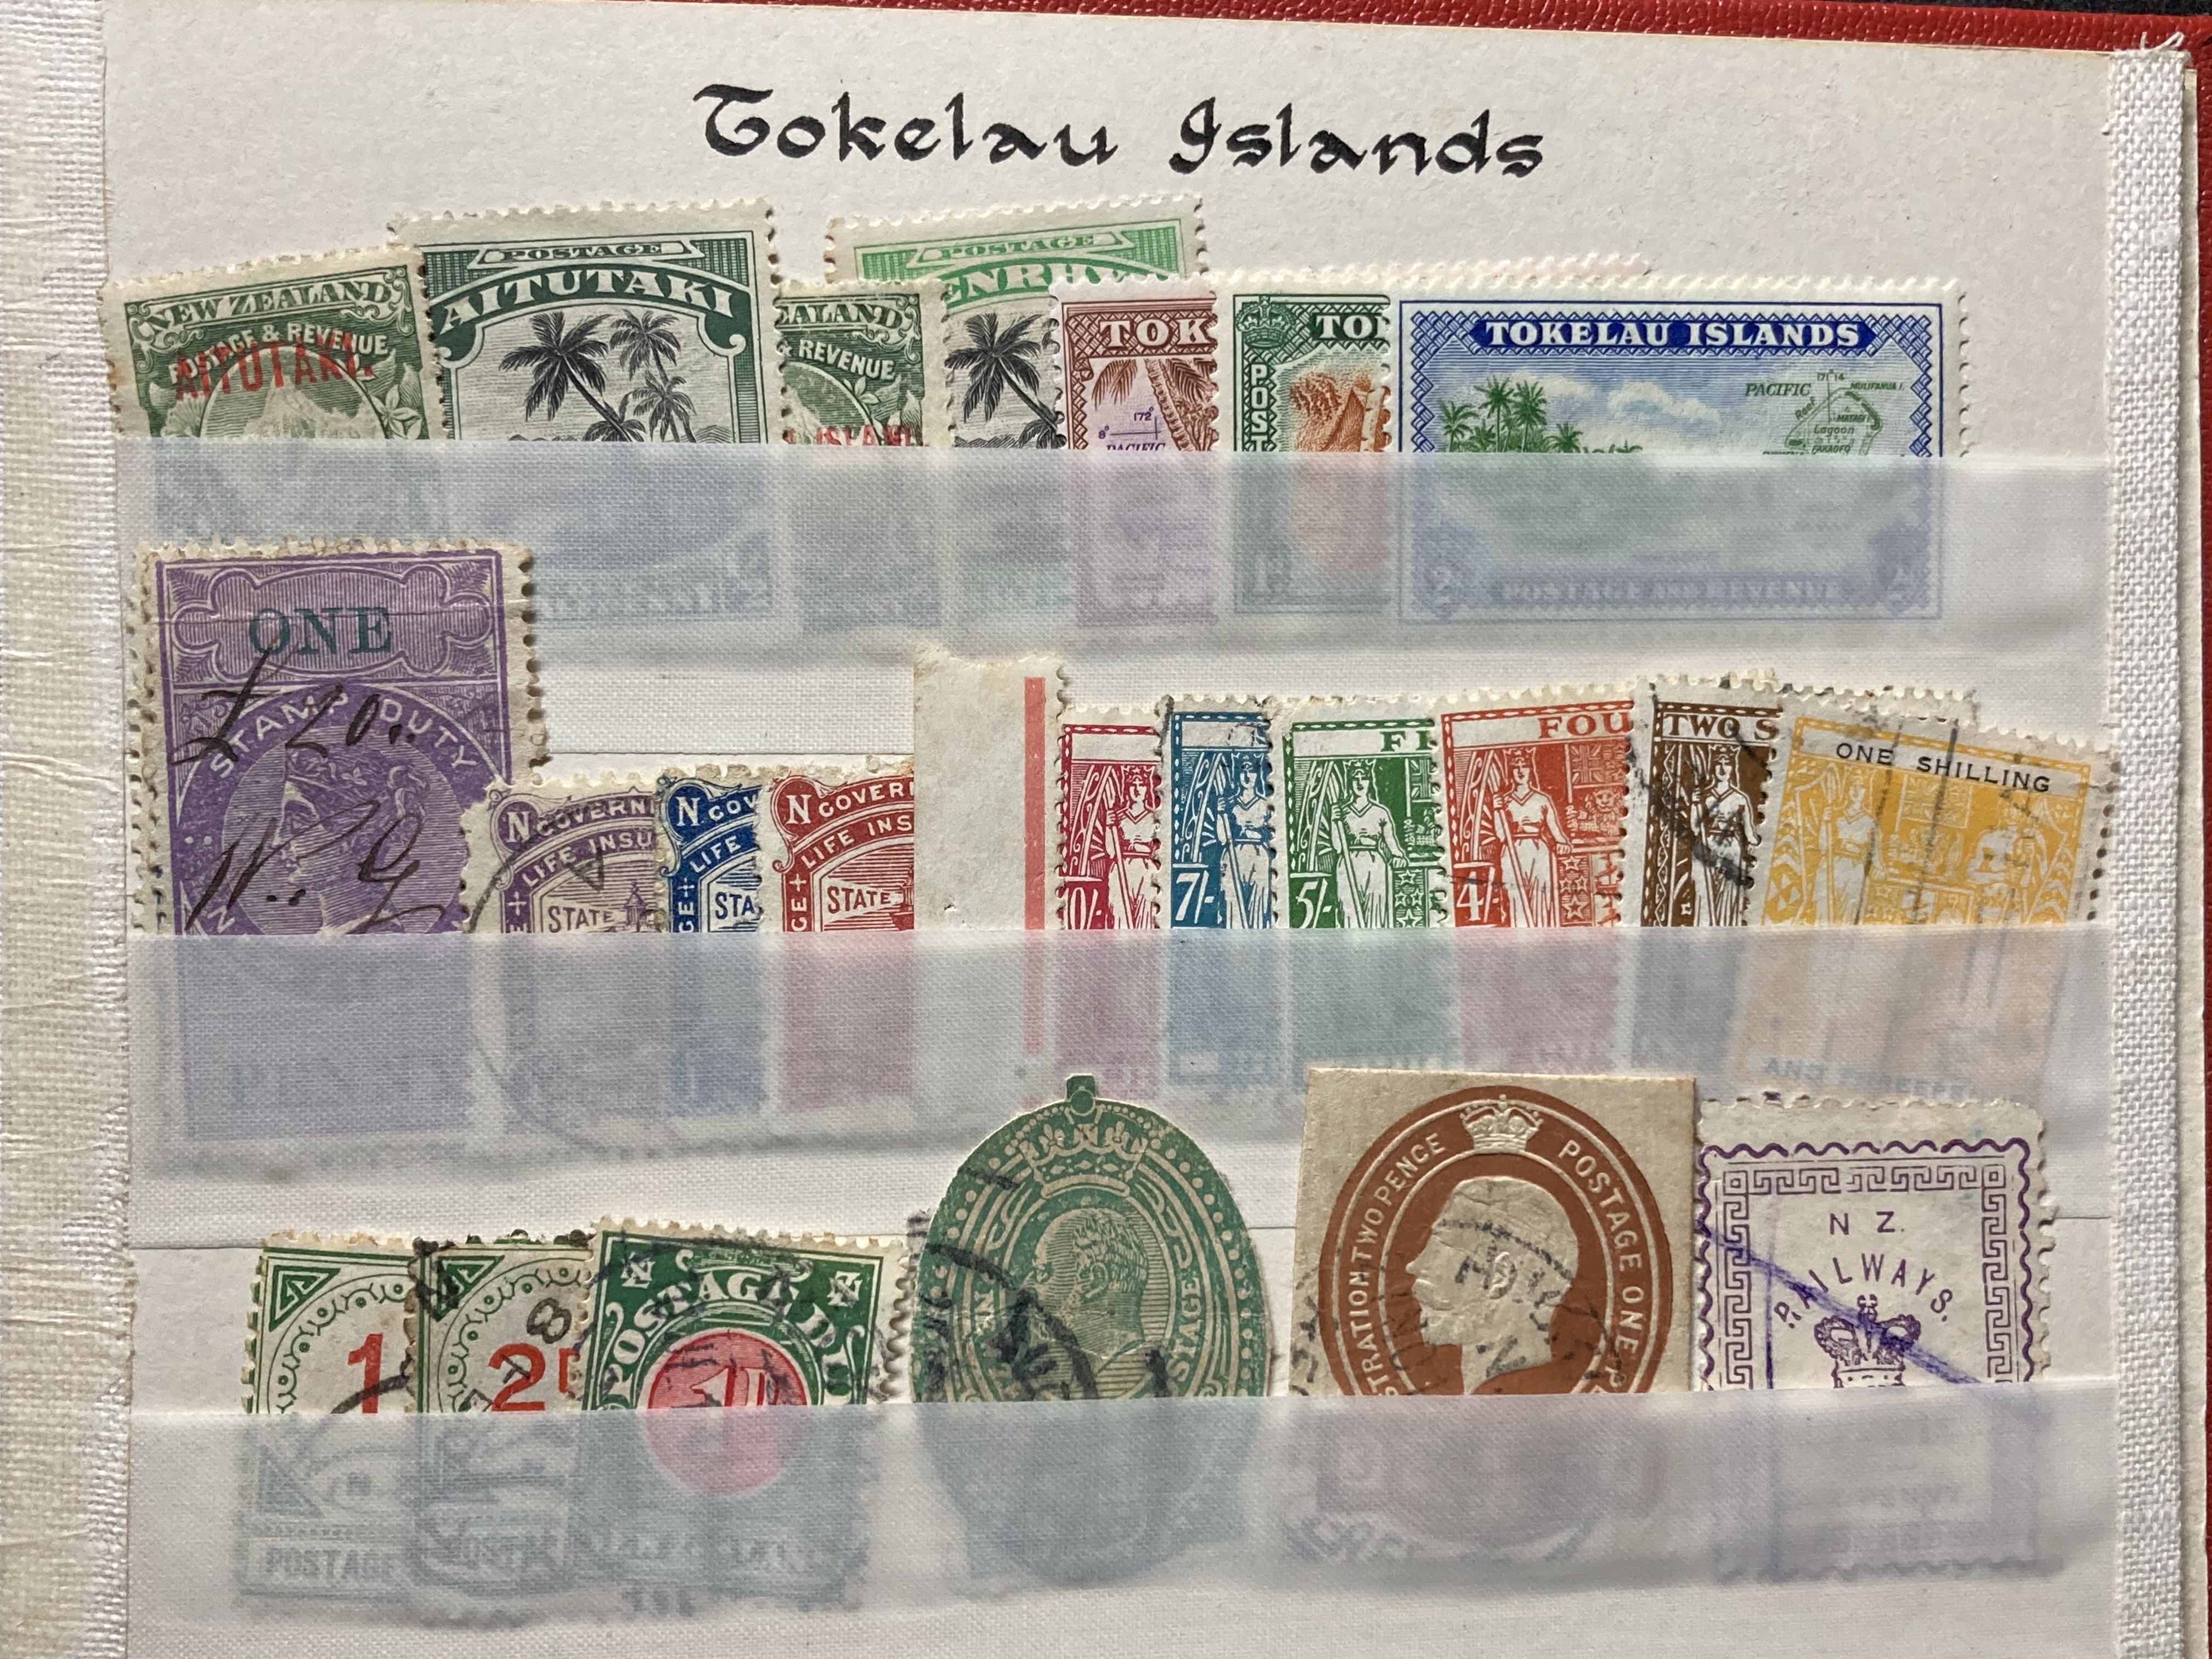 New Zealand stamps: Small stock book of mint and used on 10 pages of NZ & associated Pacific Islands - Image 11 of 11